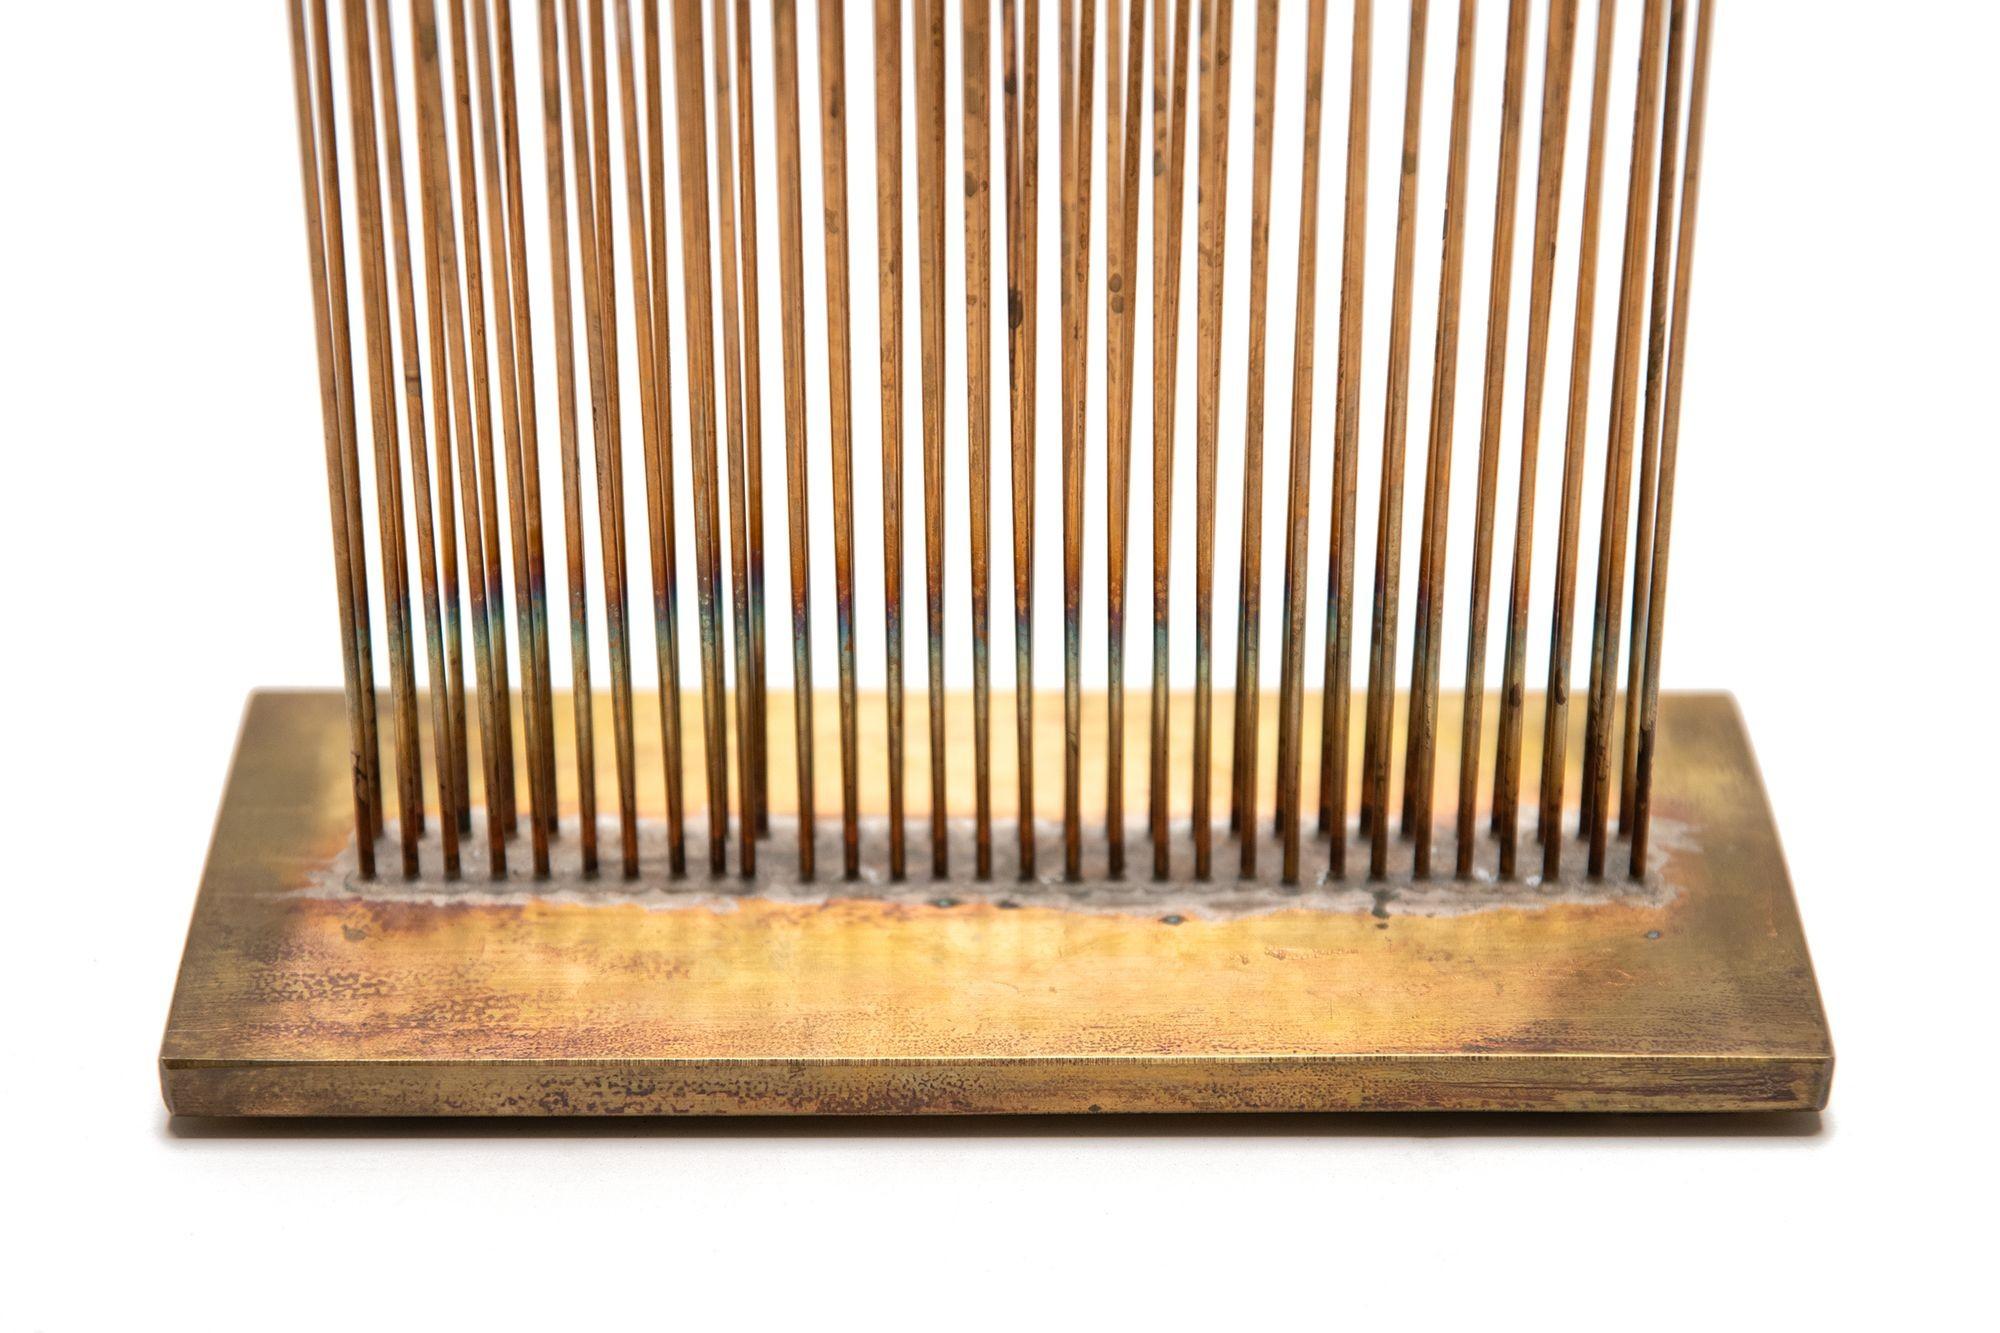 American Val Bertoia 'Sound of V' Sonambient Sculpture Silicon Bronze Rods in Brass Base For Sale